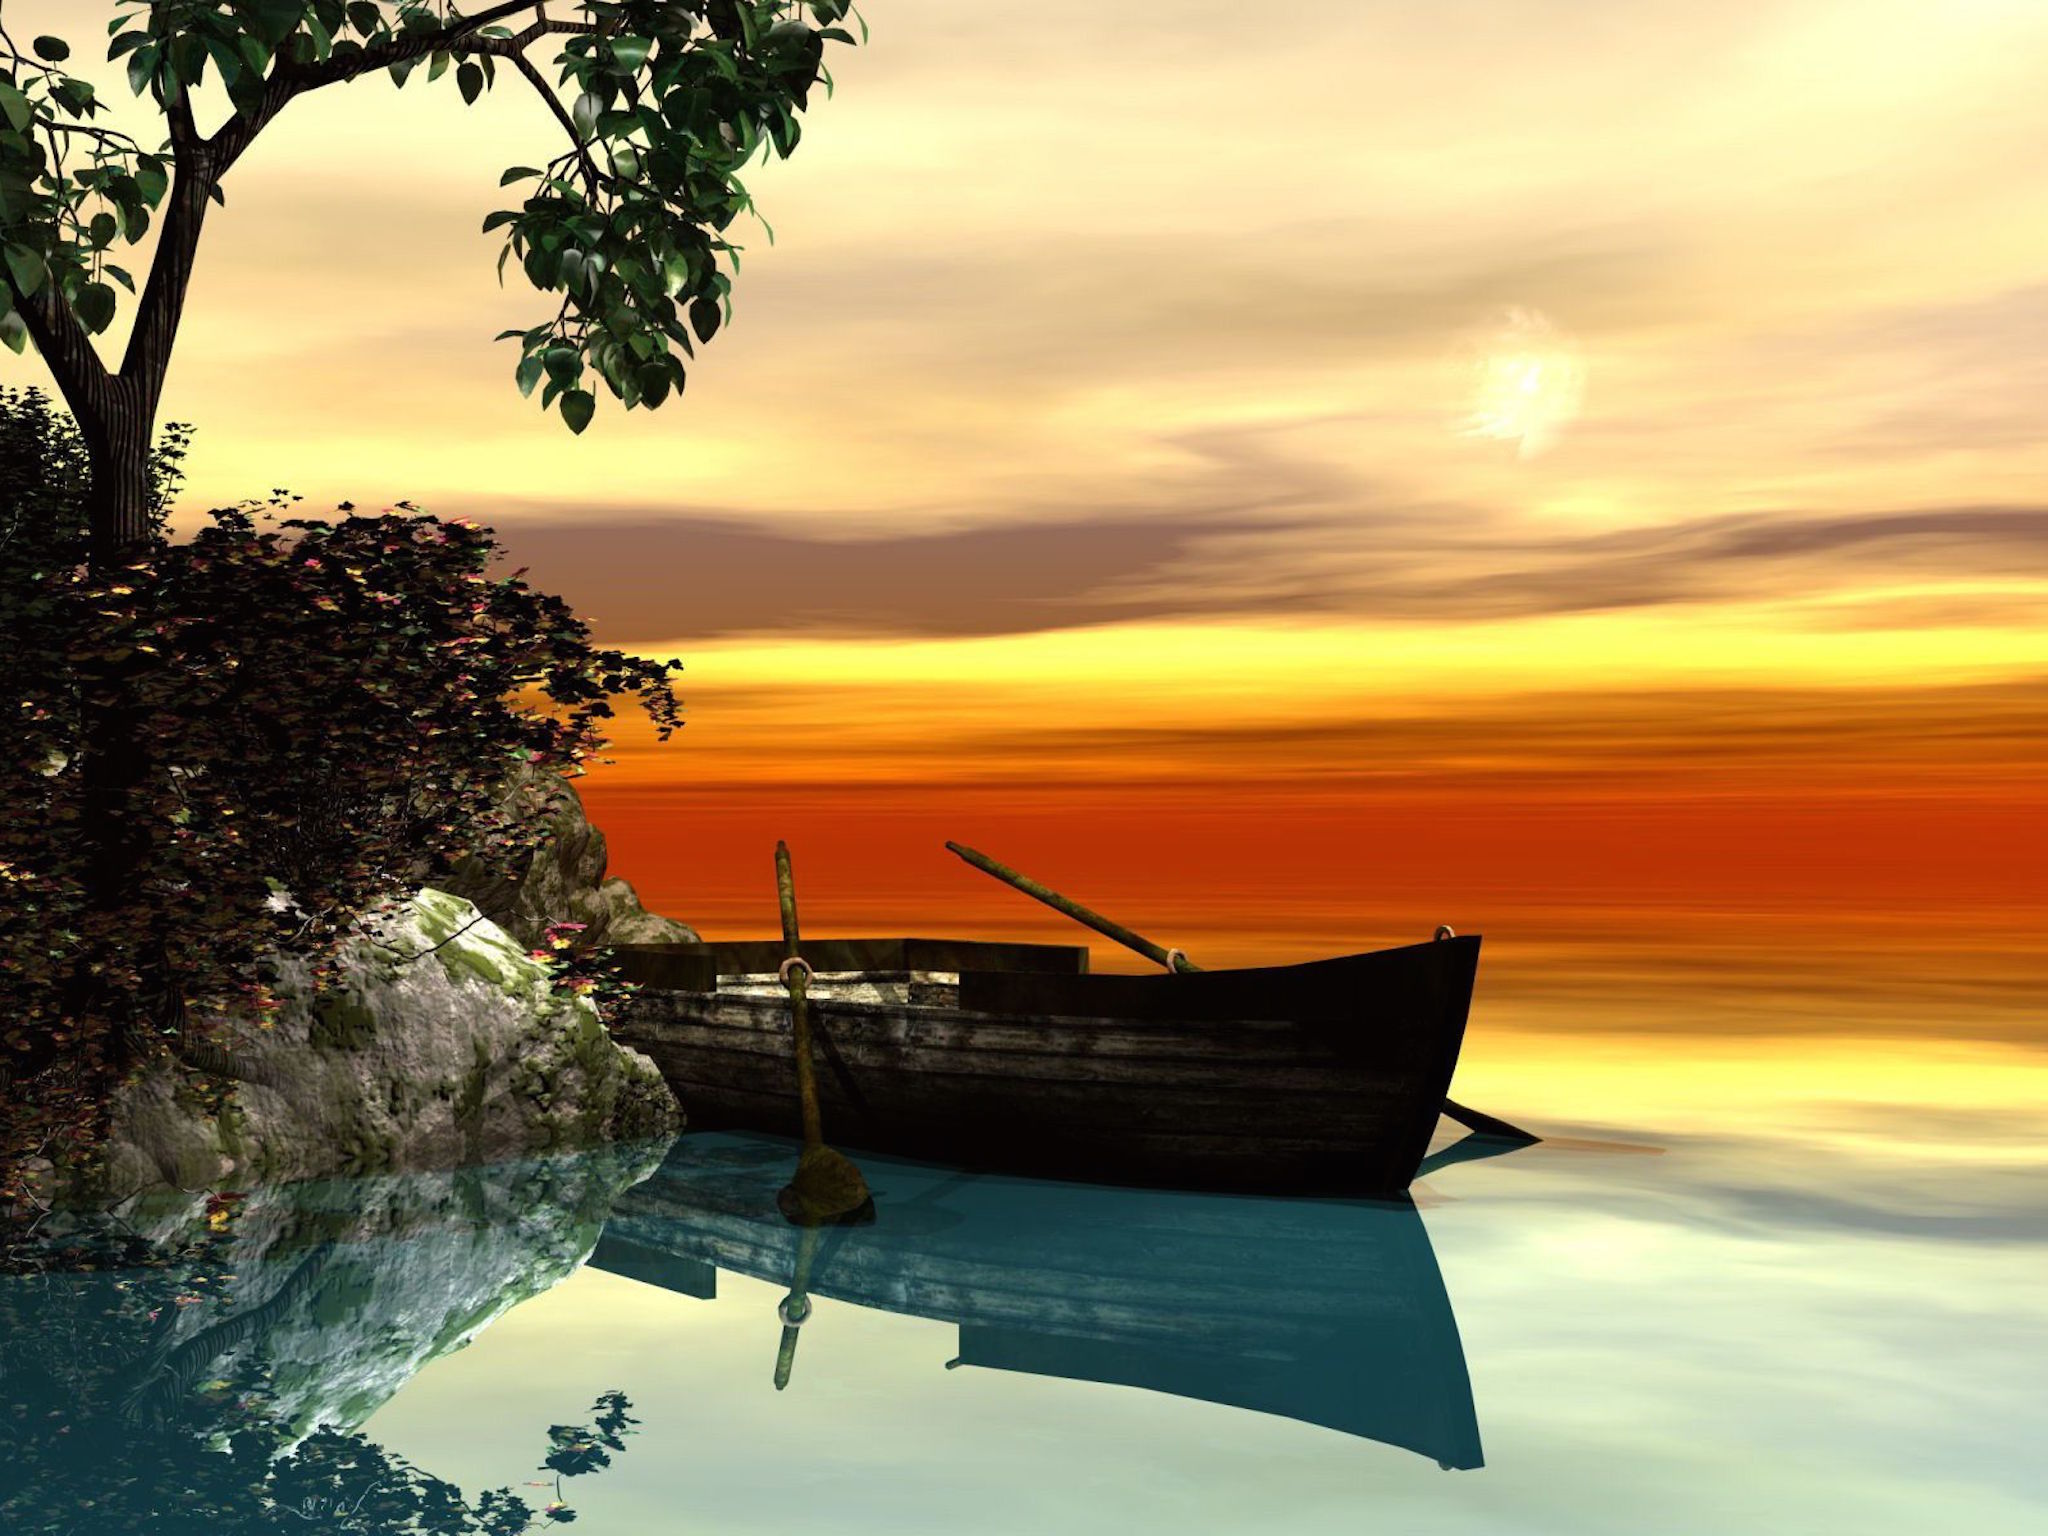 serene-rowboat-setting-wallpaper-download-free-hd-backgrounds